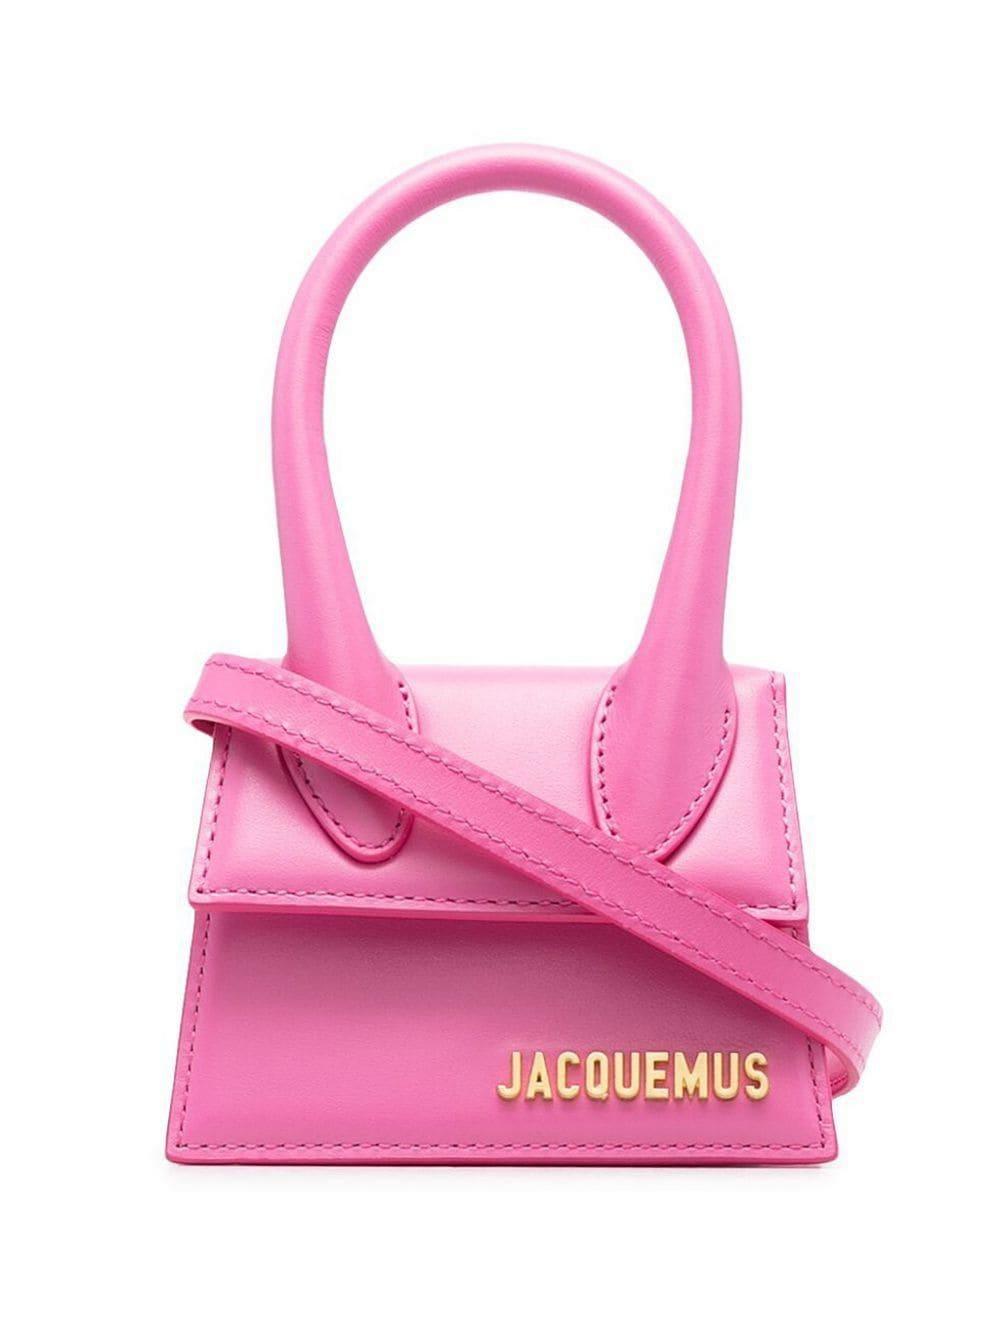 Jacquemus Le Chiquito Mini Bag in Pink | Lyst